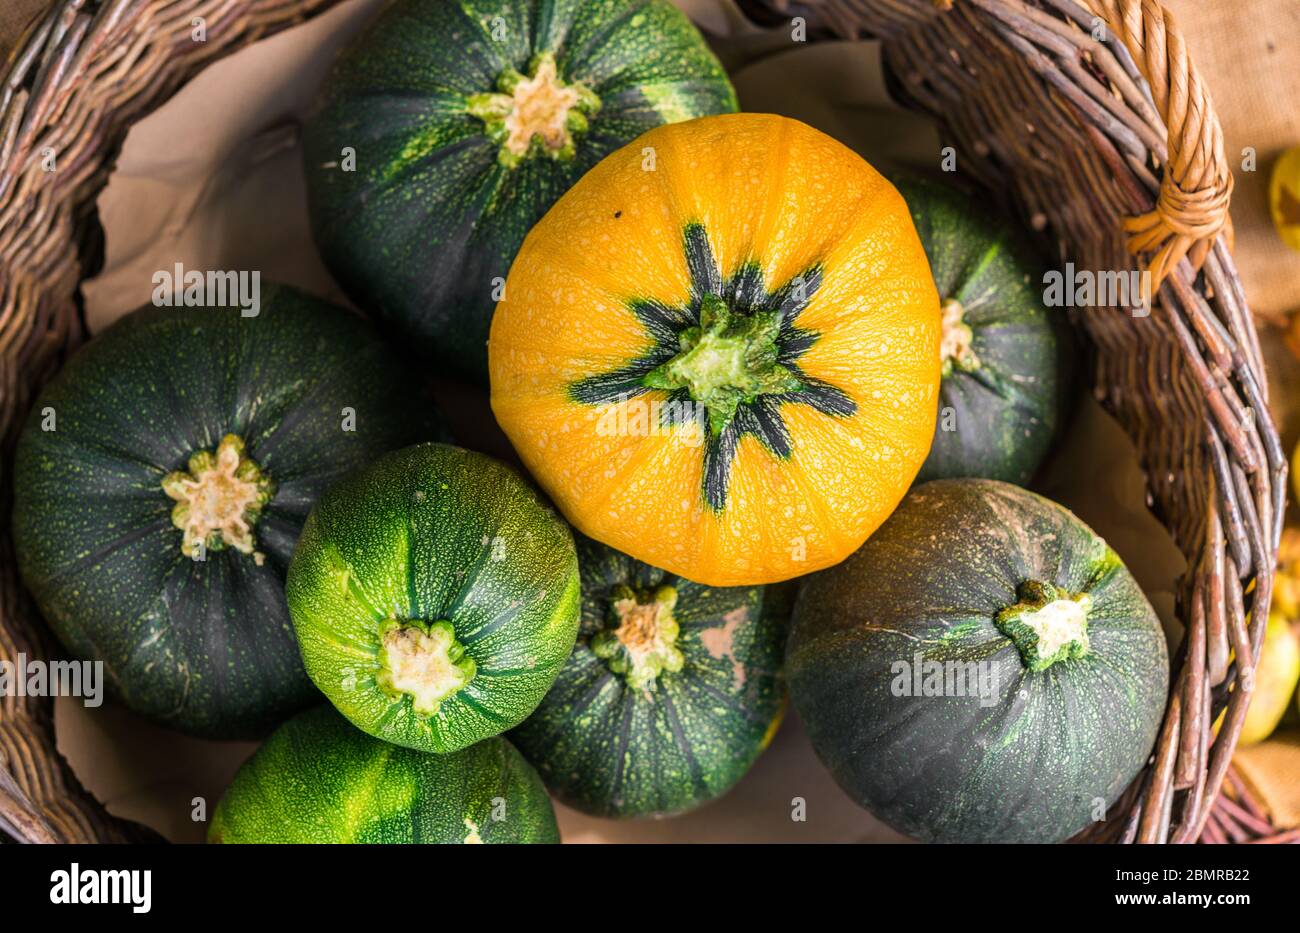 Close up food photo of round zucchinis at the farmers market stall. Stock Photo